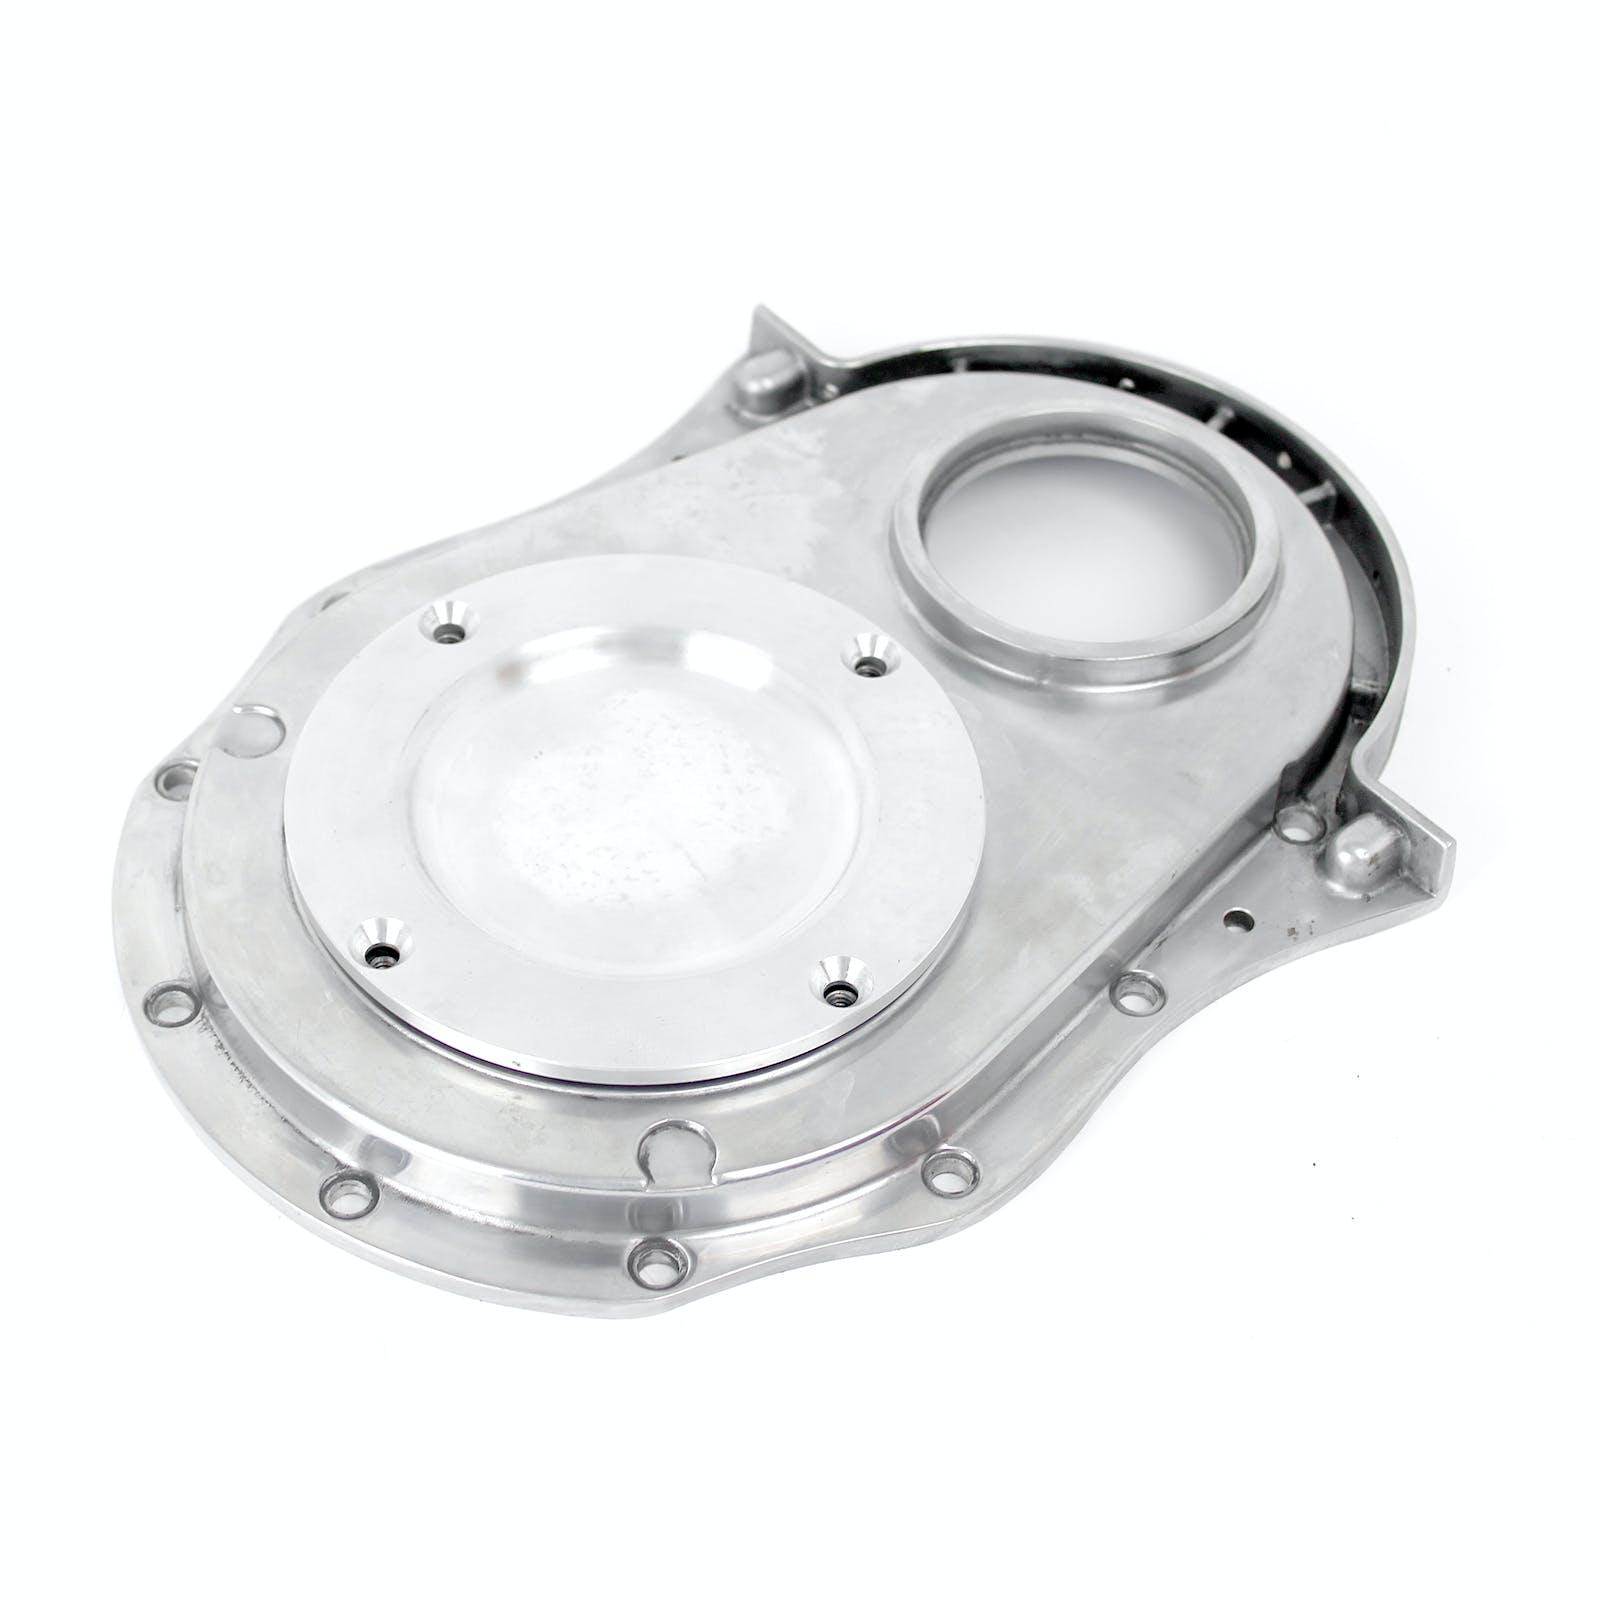 Speedmaster PCE265.1021 2-Piece Aluminum Timing Chain Cover w/ Inspection Plate